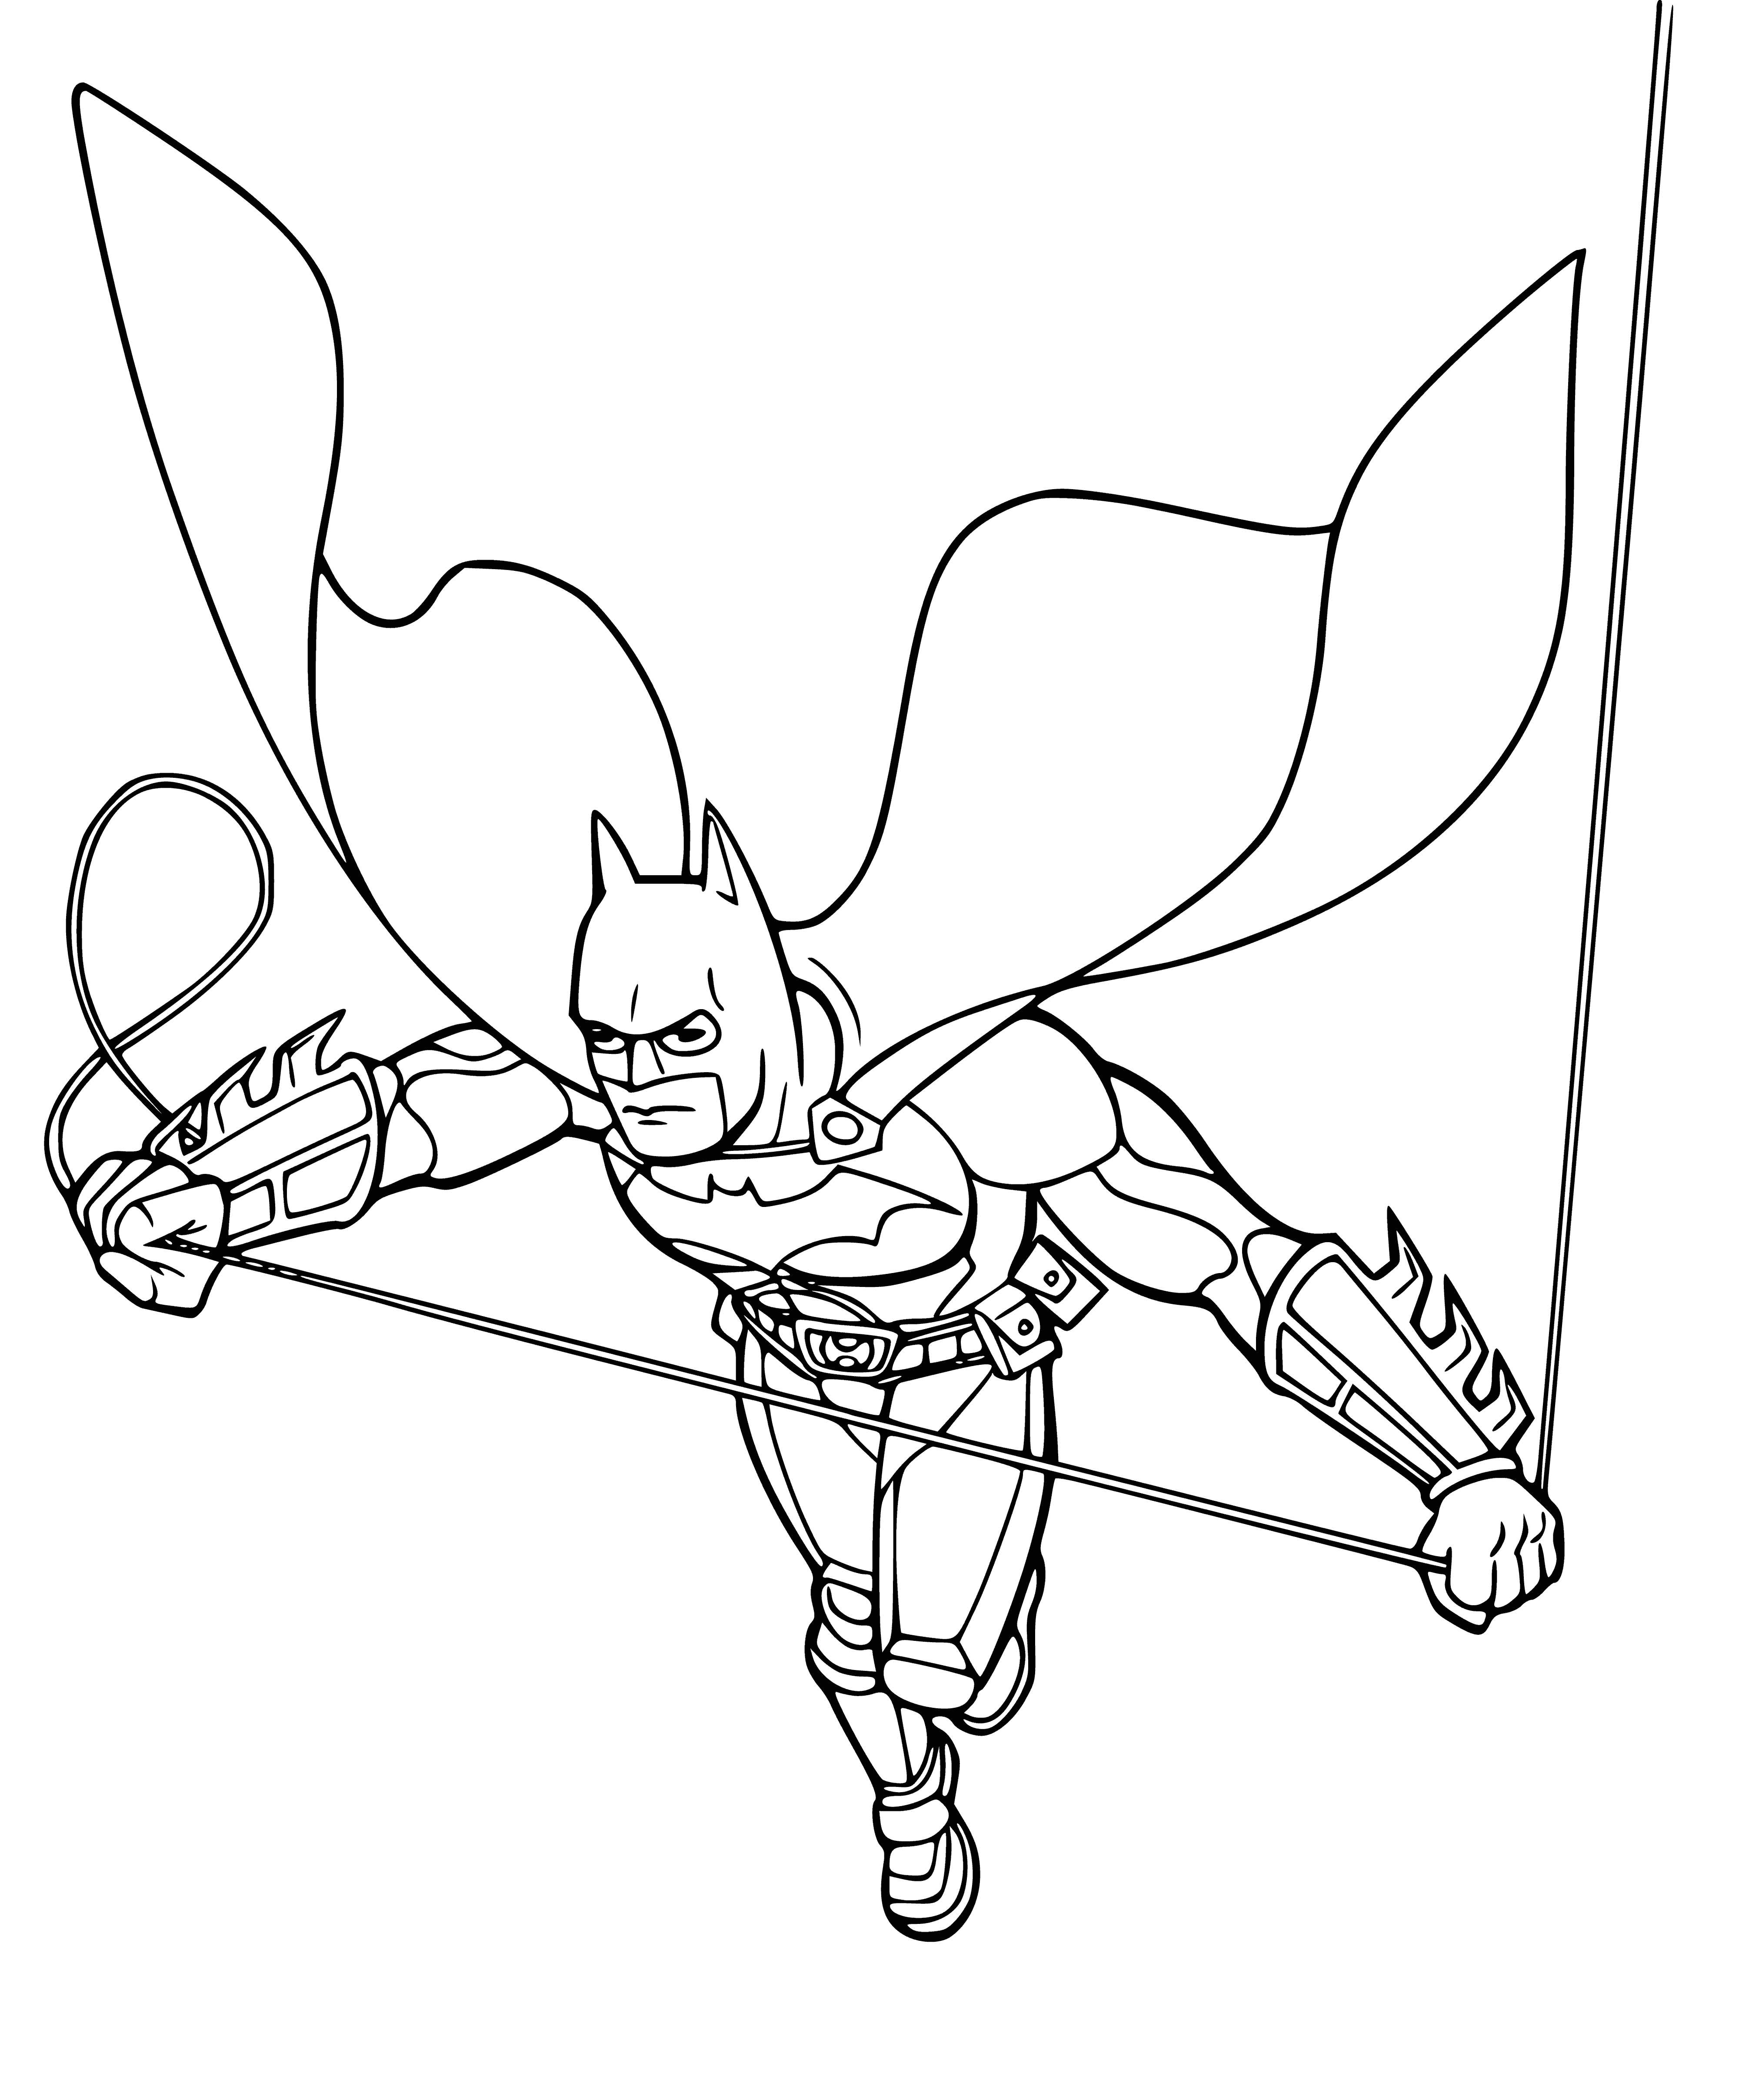 coloring page: Batman stands on a rooftop, arms crossed, determined to protect Gotham from crime. In the background, tall buildings and a full moon fill the cityscape.